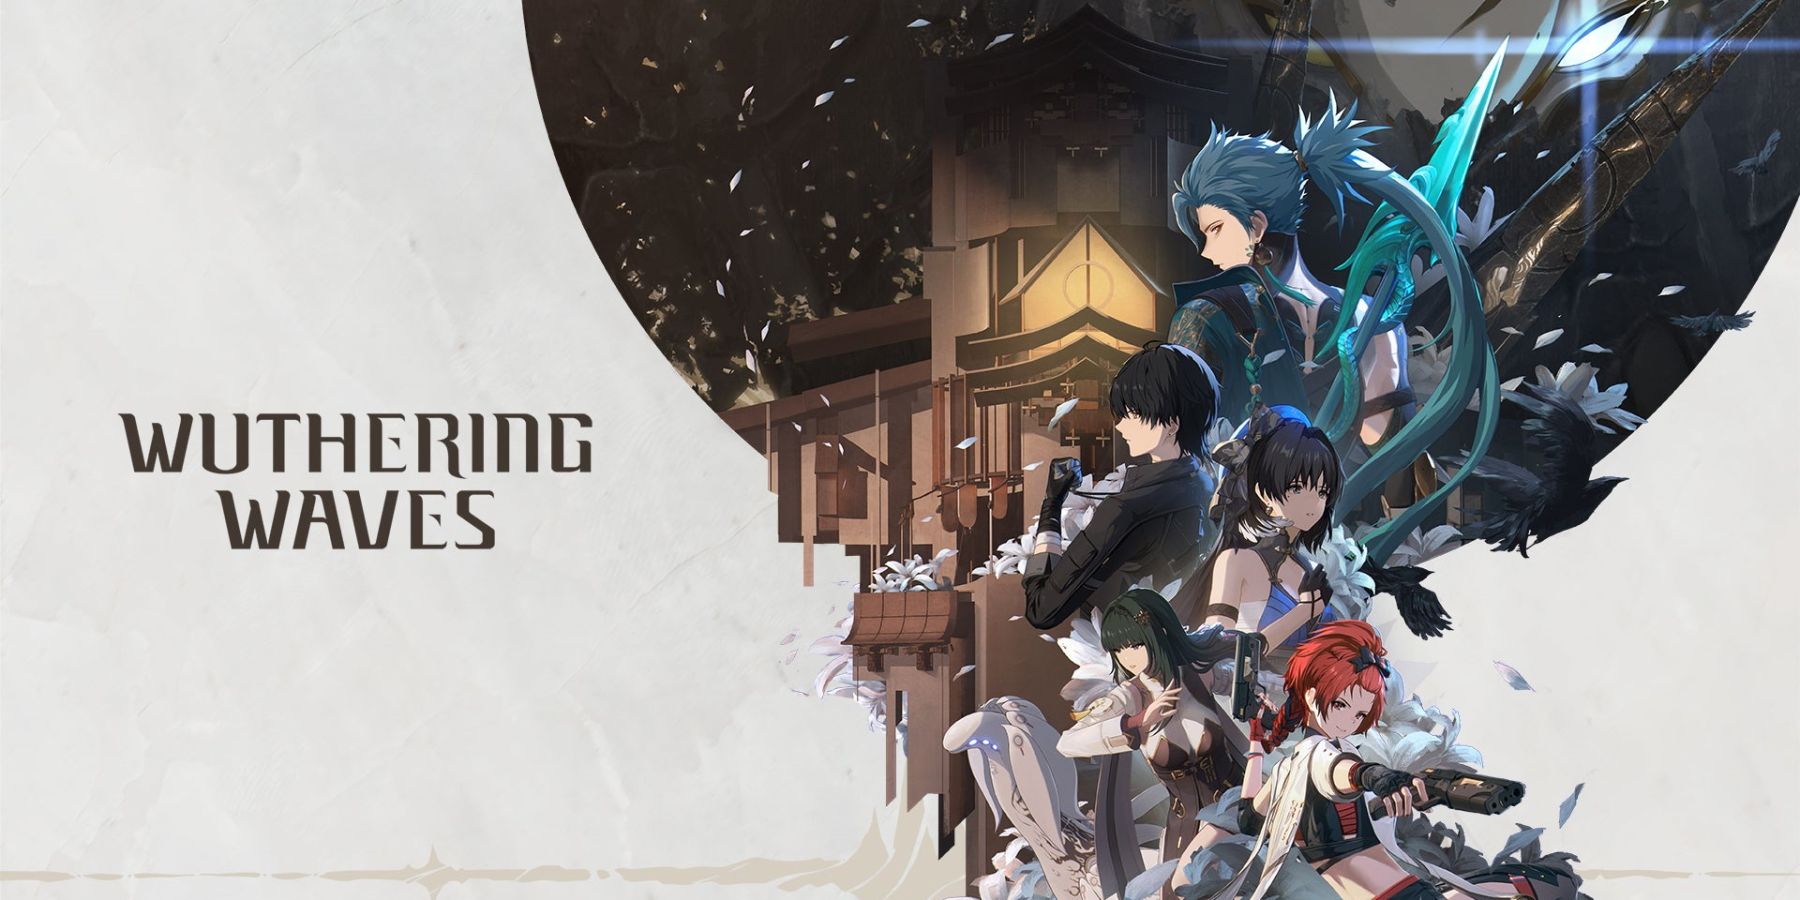 The key visual for Kuro Game action RPG Wuthering Waves. The visual depicts multiple members of the game's cast against a night-time city background.